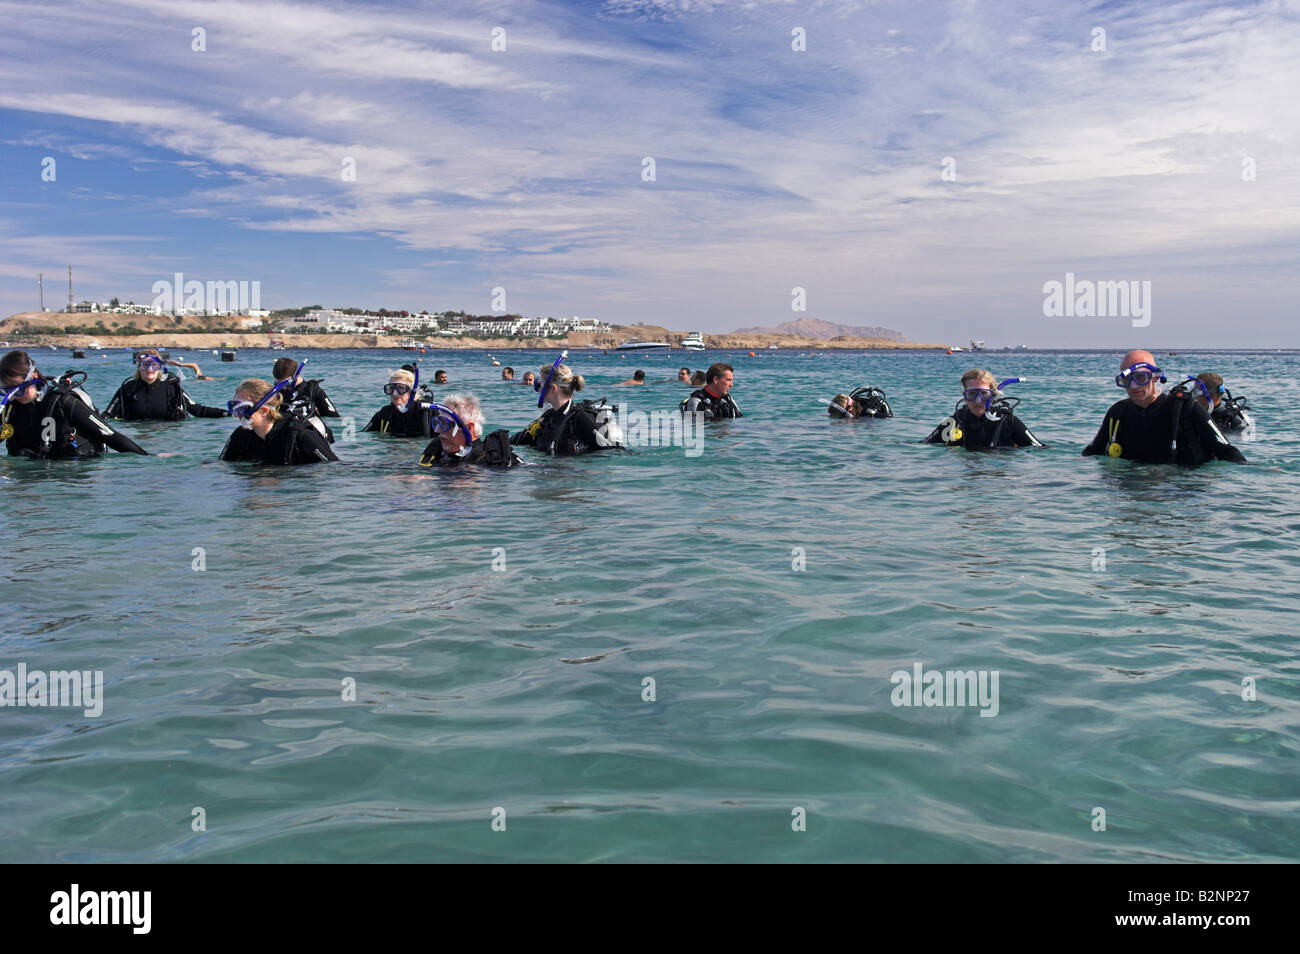 Group of Experience Scuba divers ready for first dive Naama Bay Sharm el Sheikh Sinai Egypt December sun Stock Photo